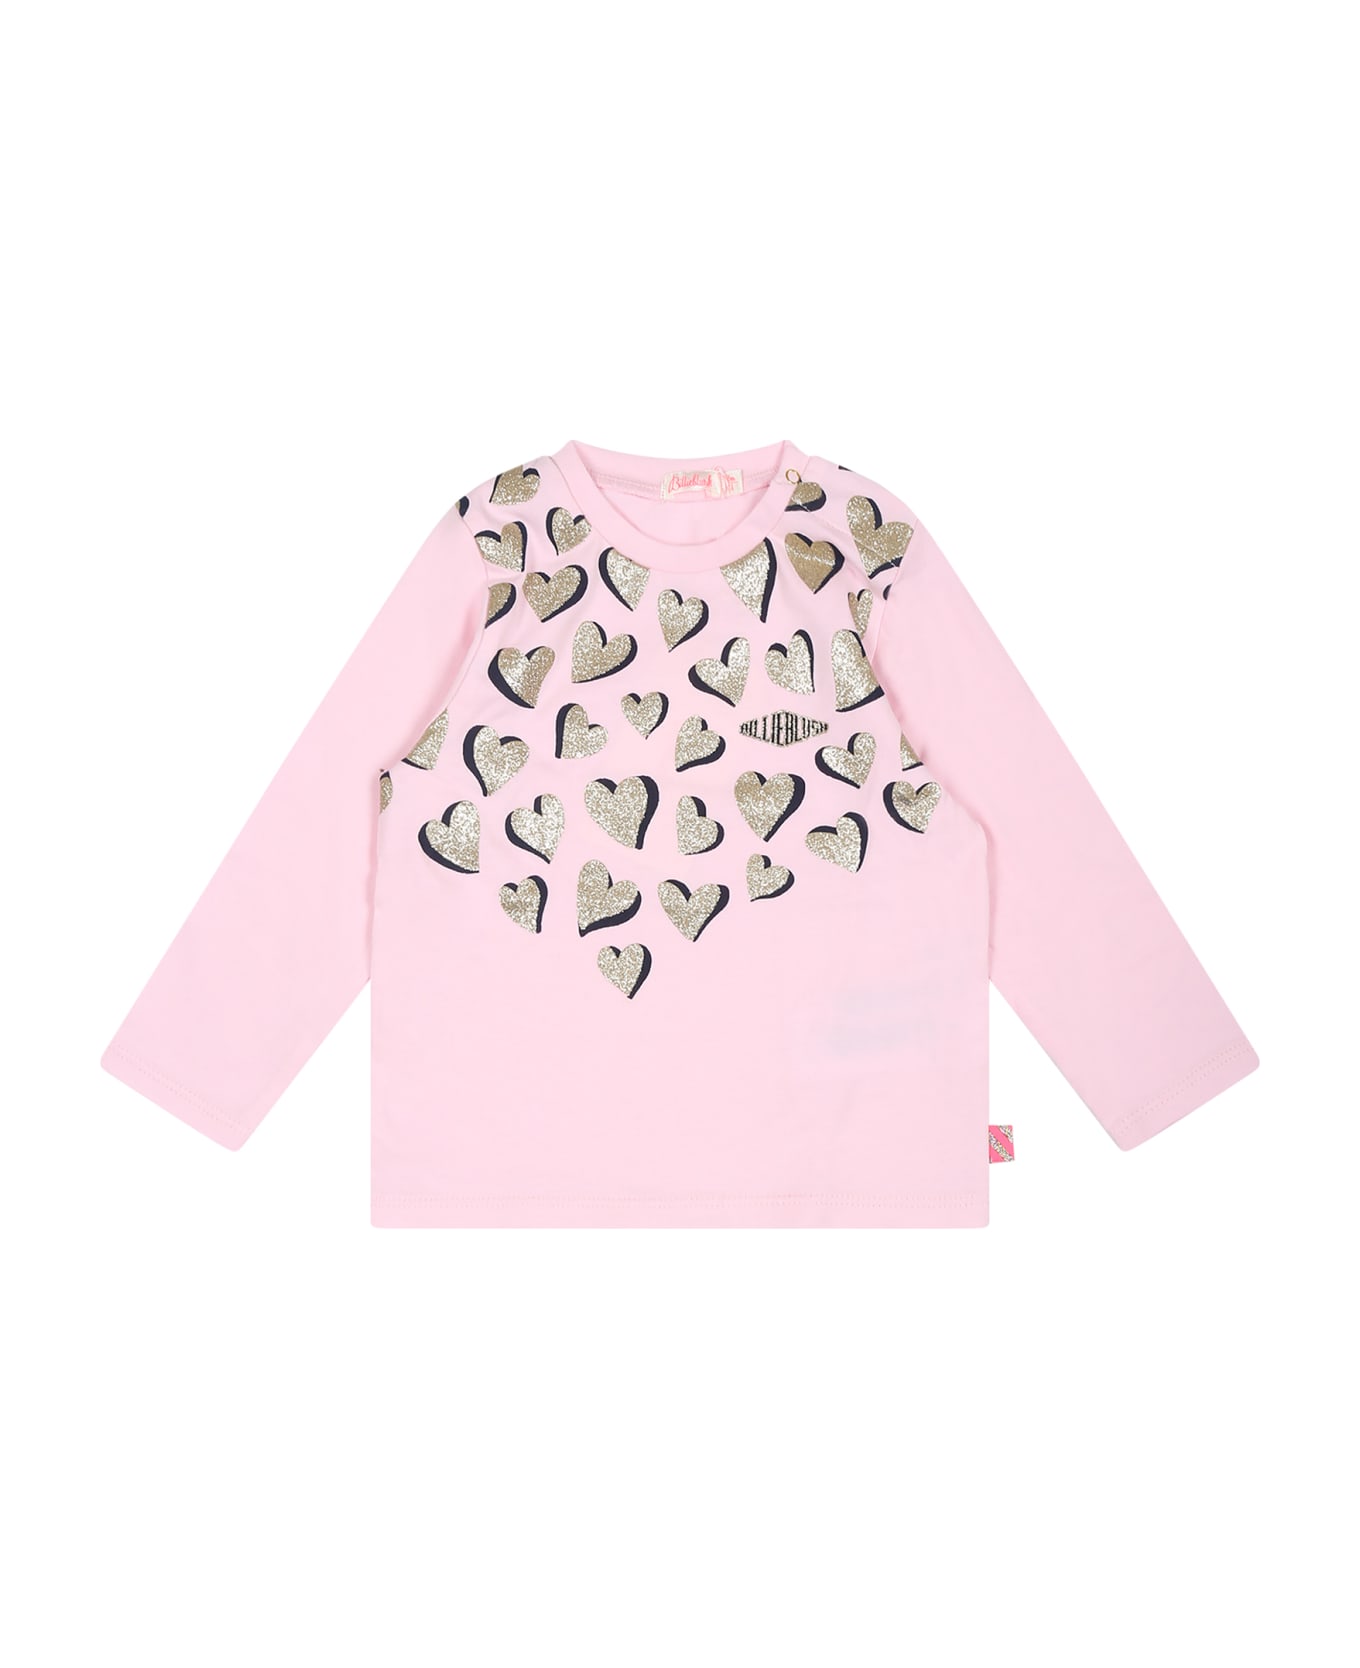 Billieblush Pink T-shirt For Baby Girl With Hearts - Pink